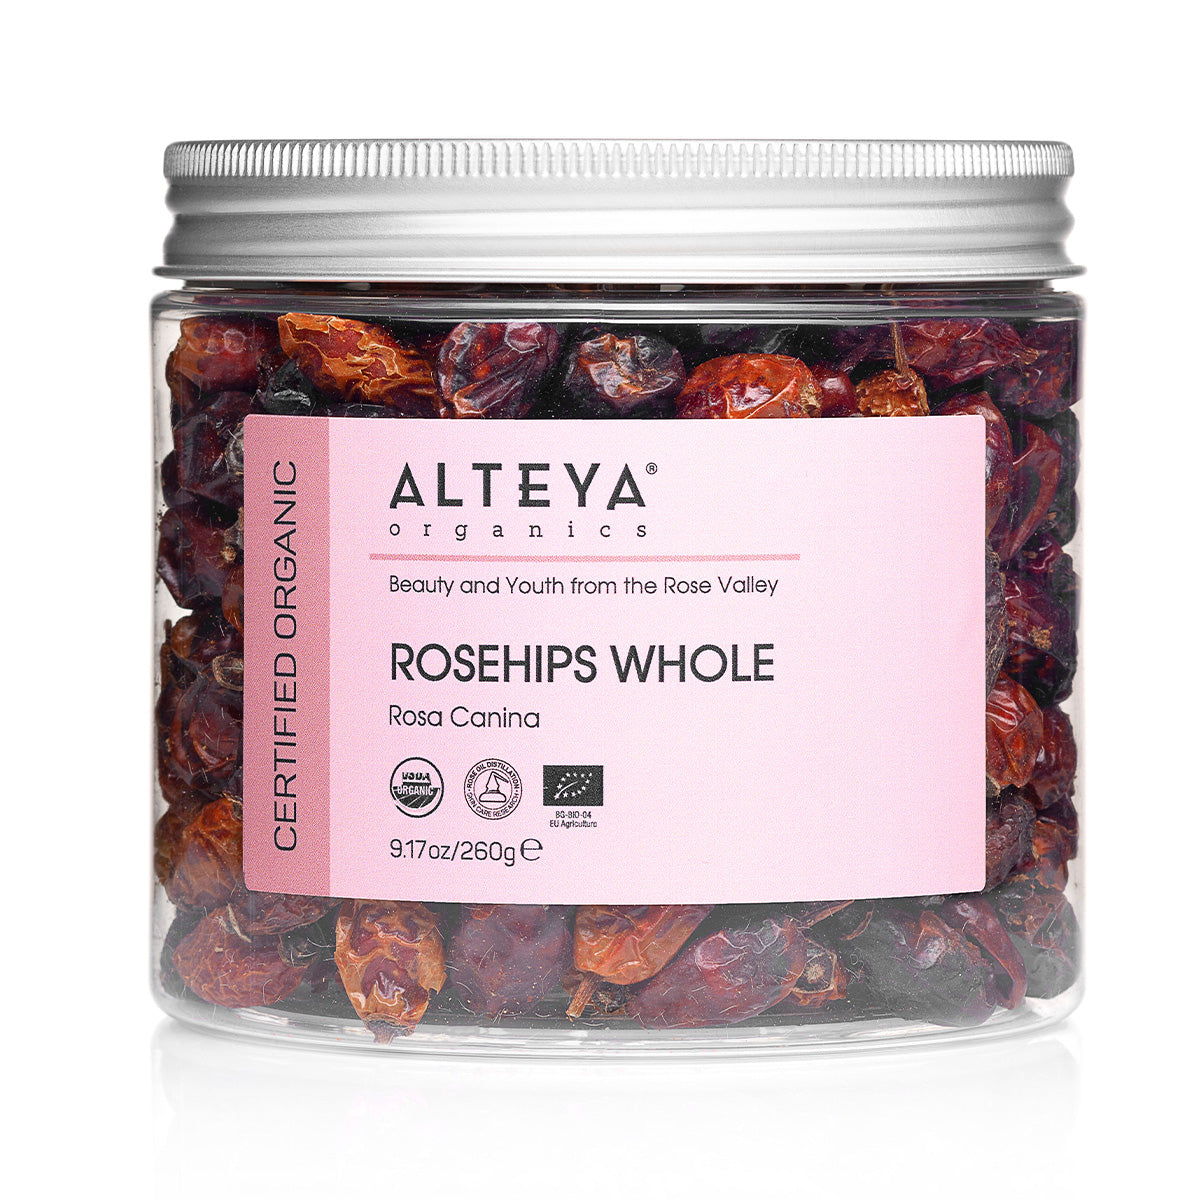 A jar of Alteya Organics Dry Whole Rose Hips on a white background.